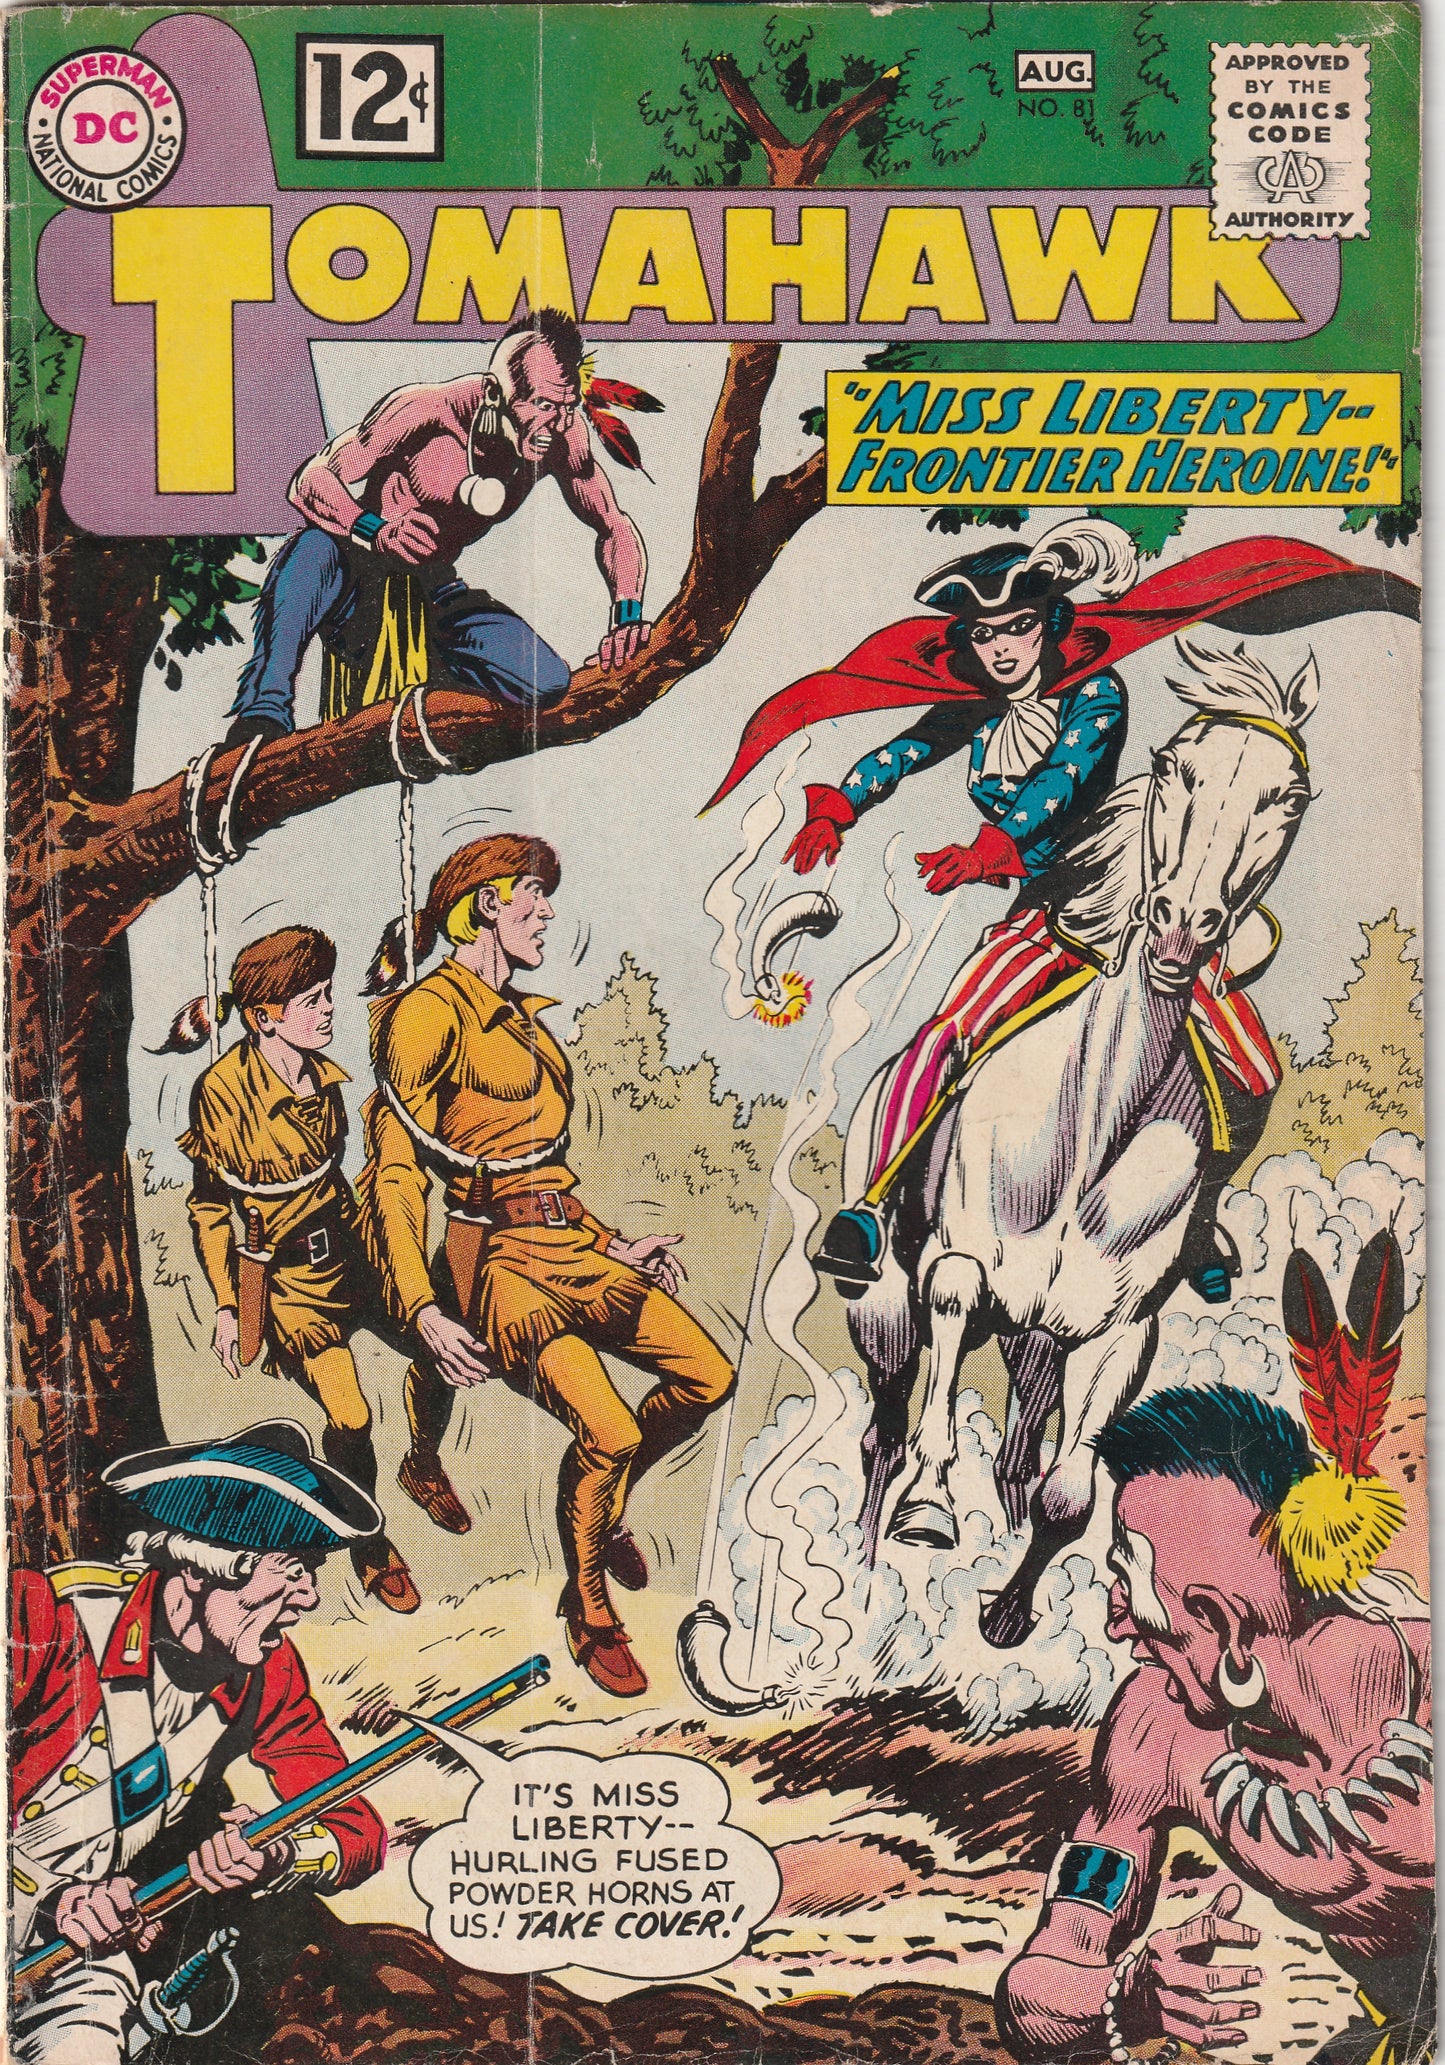 Tomahawk #81 (1962) - 1st Appearance of Miss Liberty